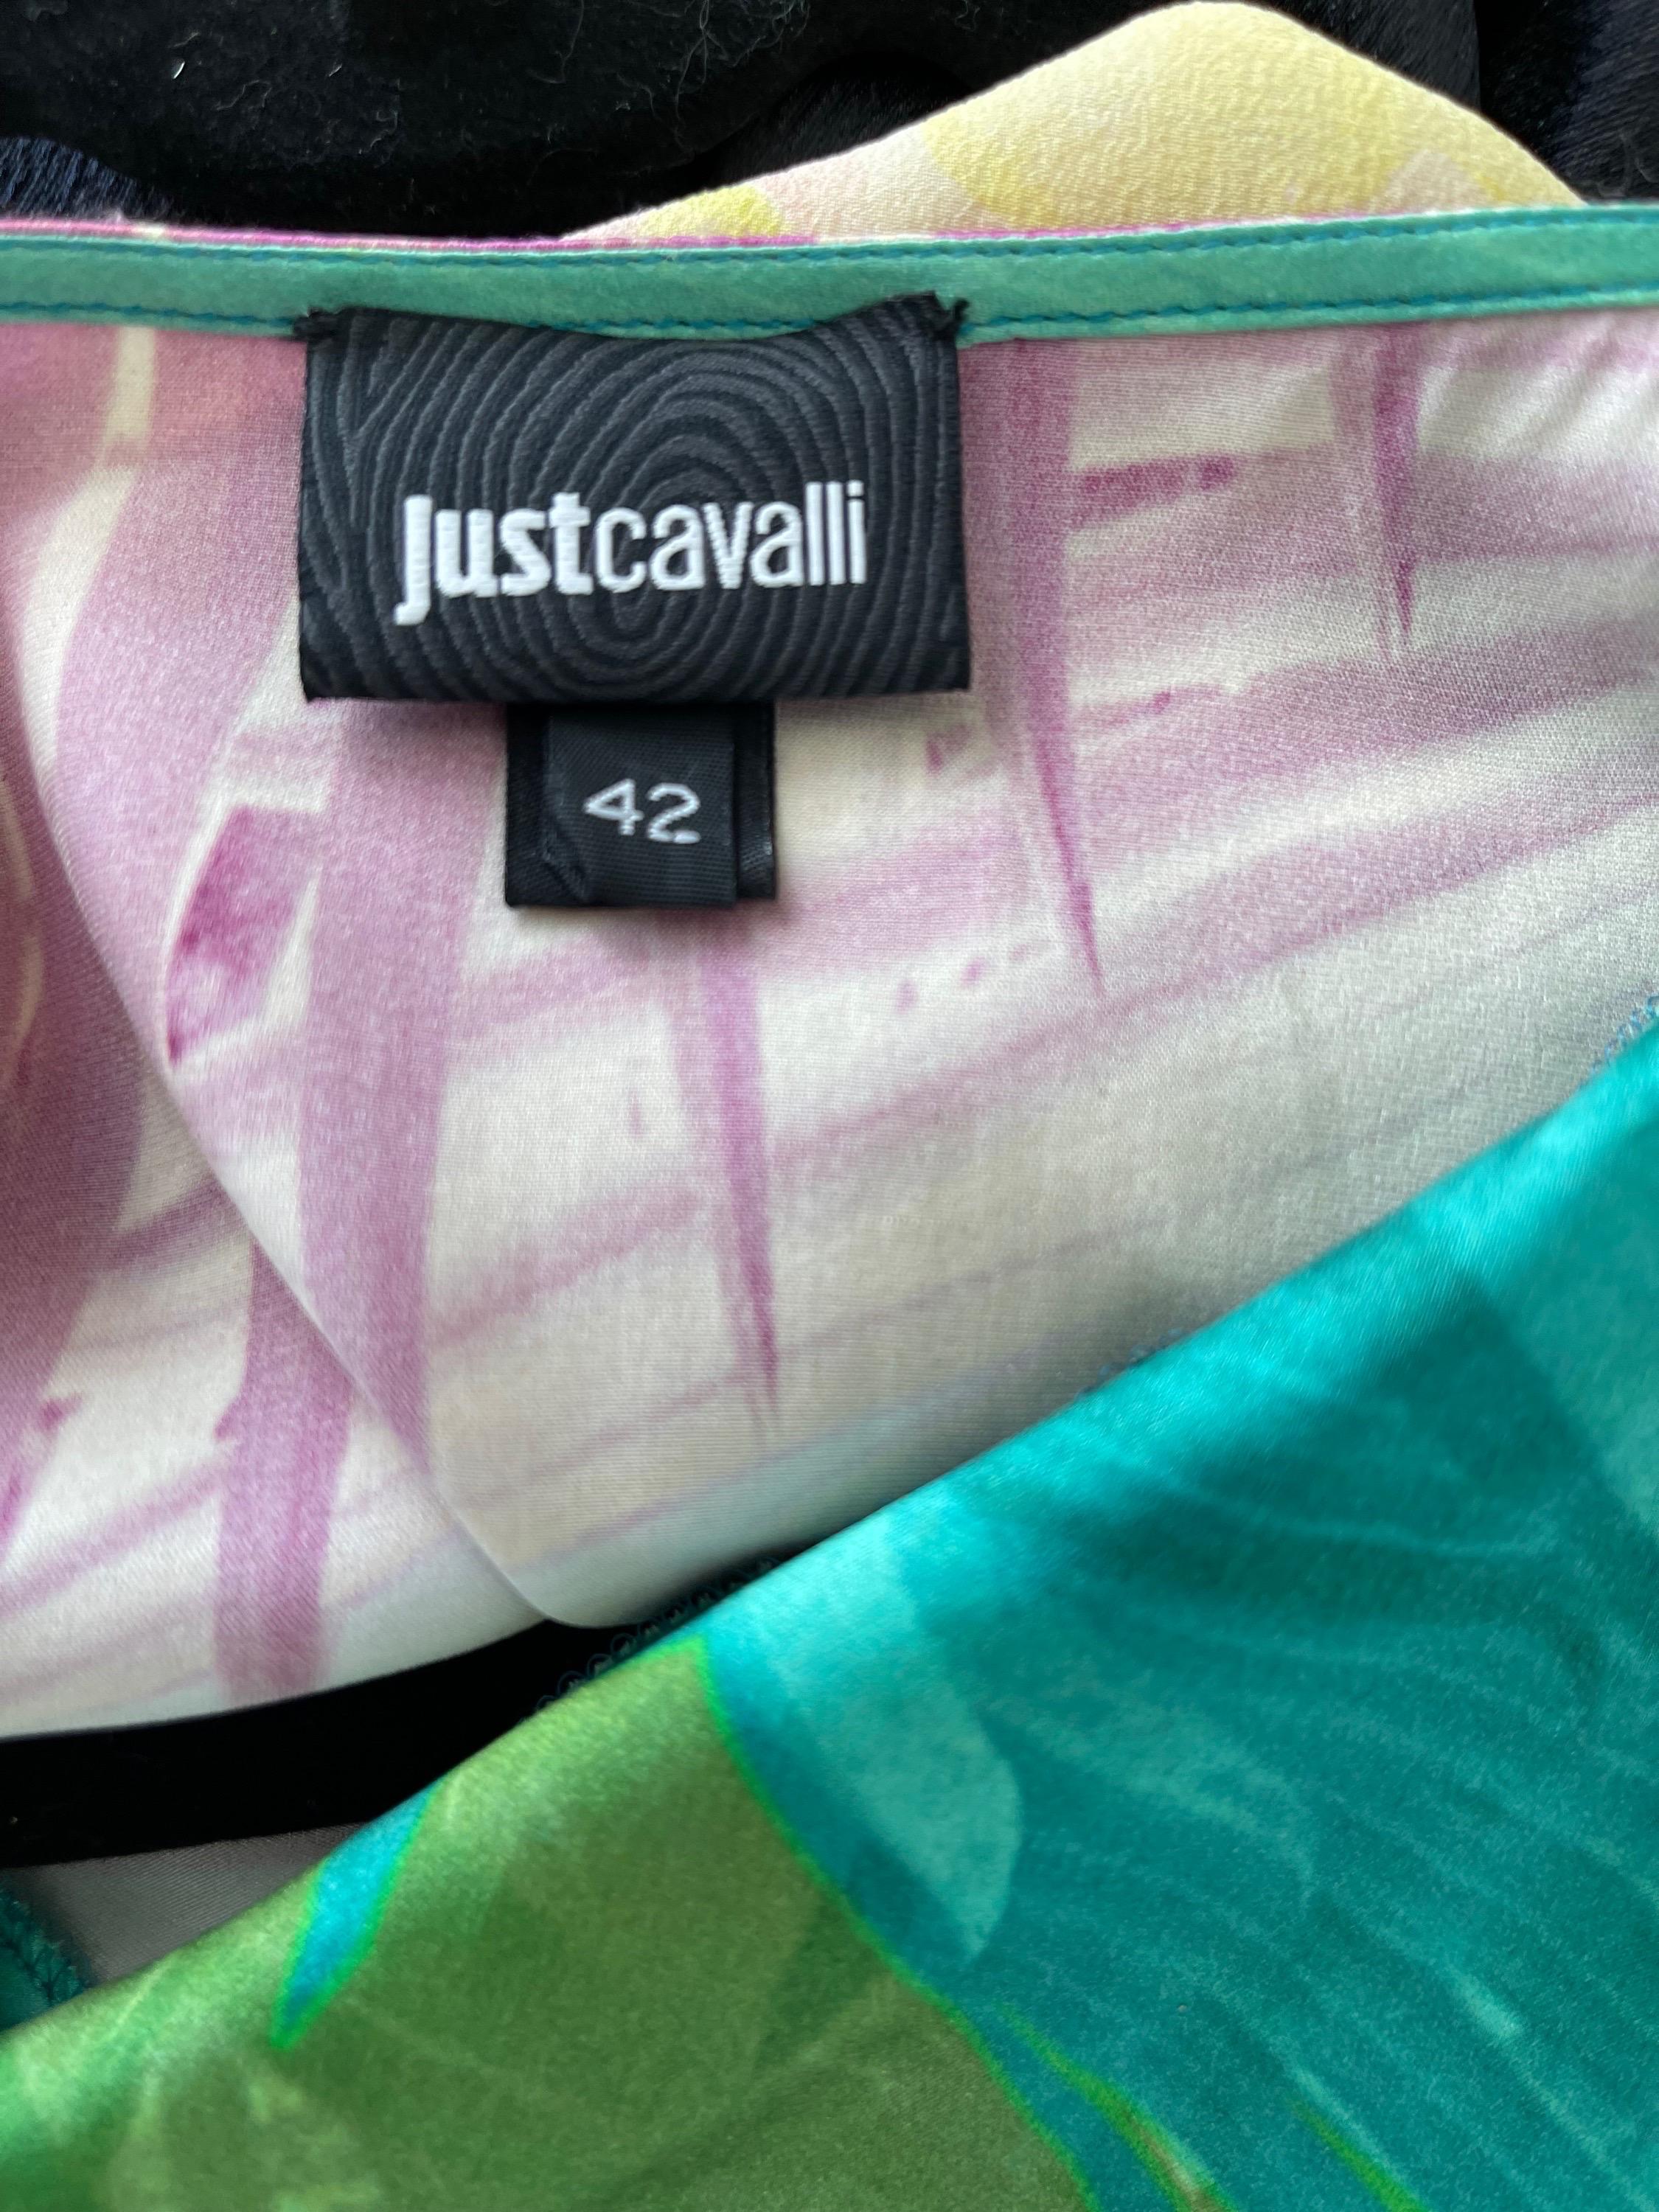 Beautiful JUST CAVALLI colorful tropical print sleeveless silk dress ! Features palm prints in vibrant colors of pink, fuchsia, purple, turquoise blue, peach and green throughout. Lots of flattering drape effects. White patent leather belt is